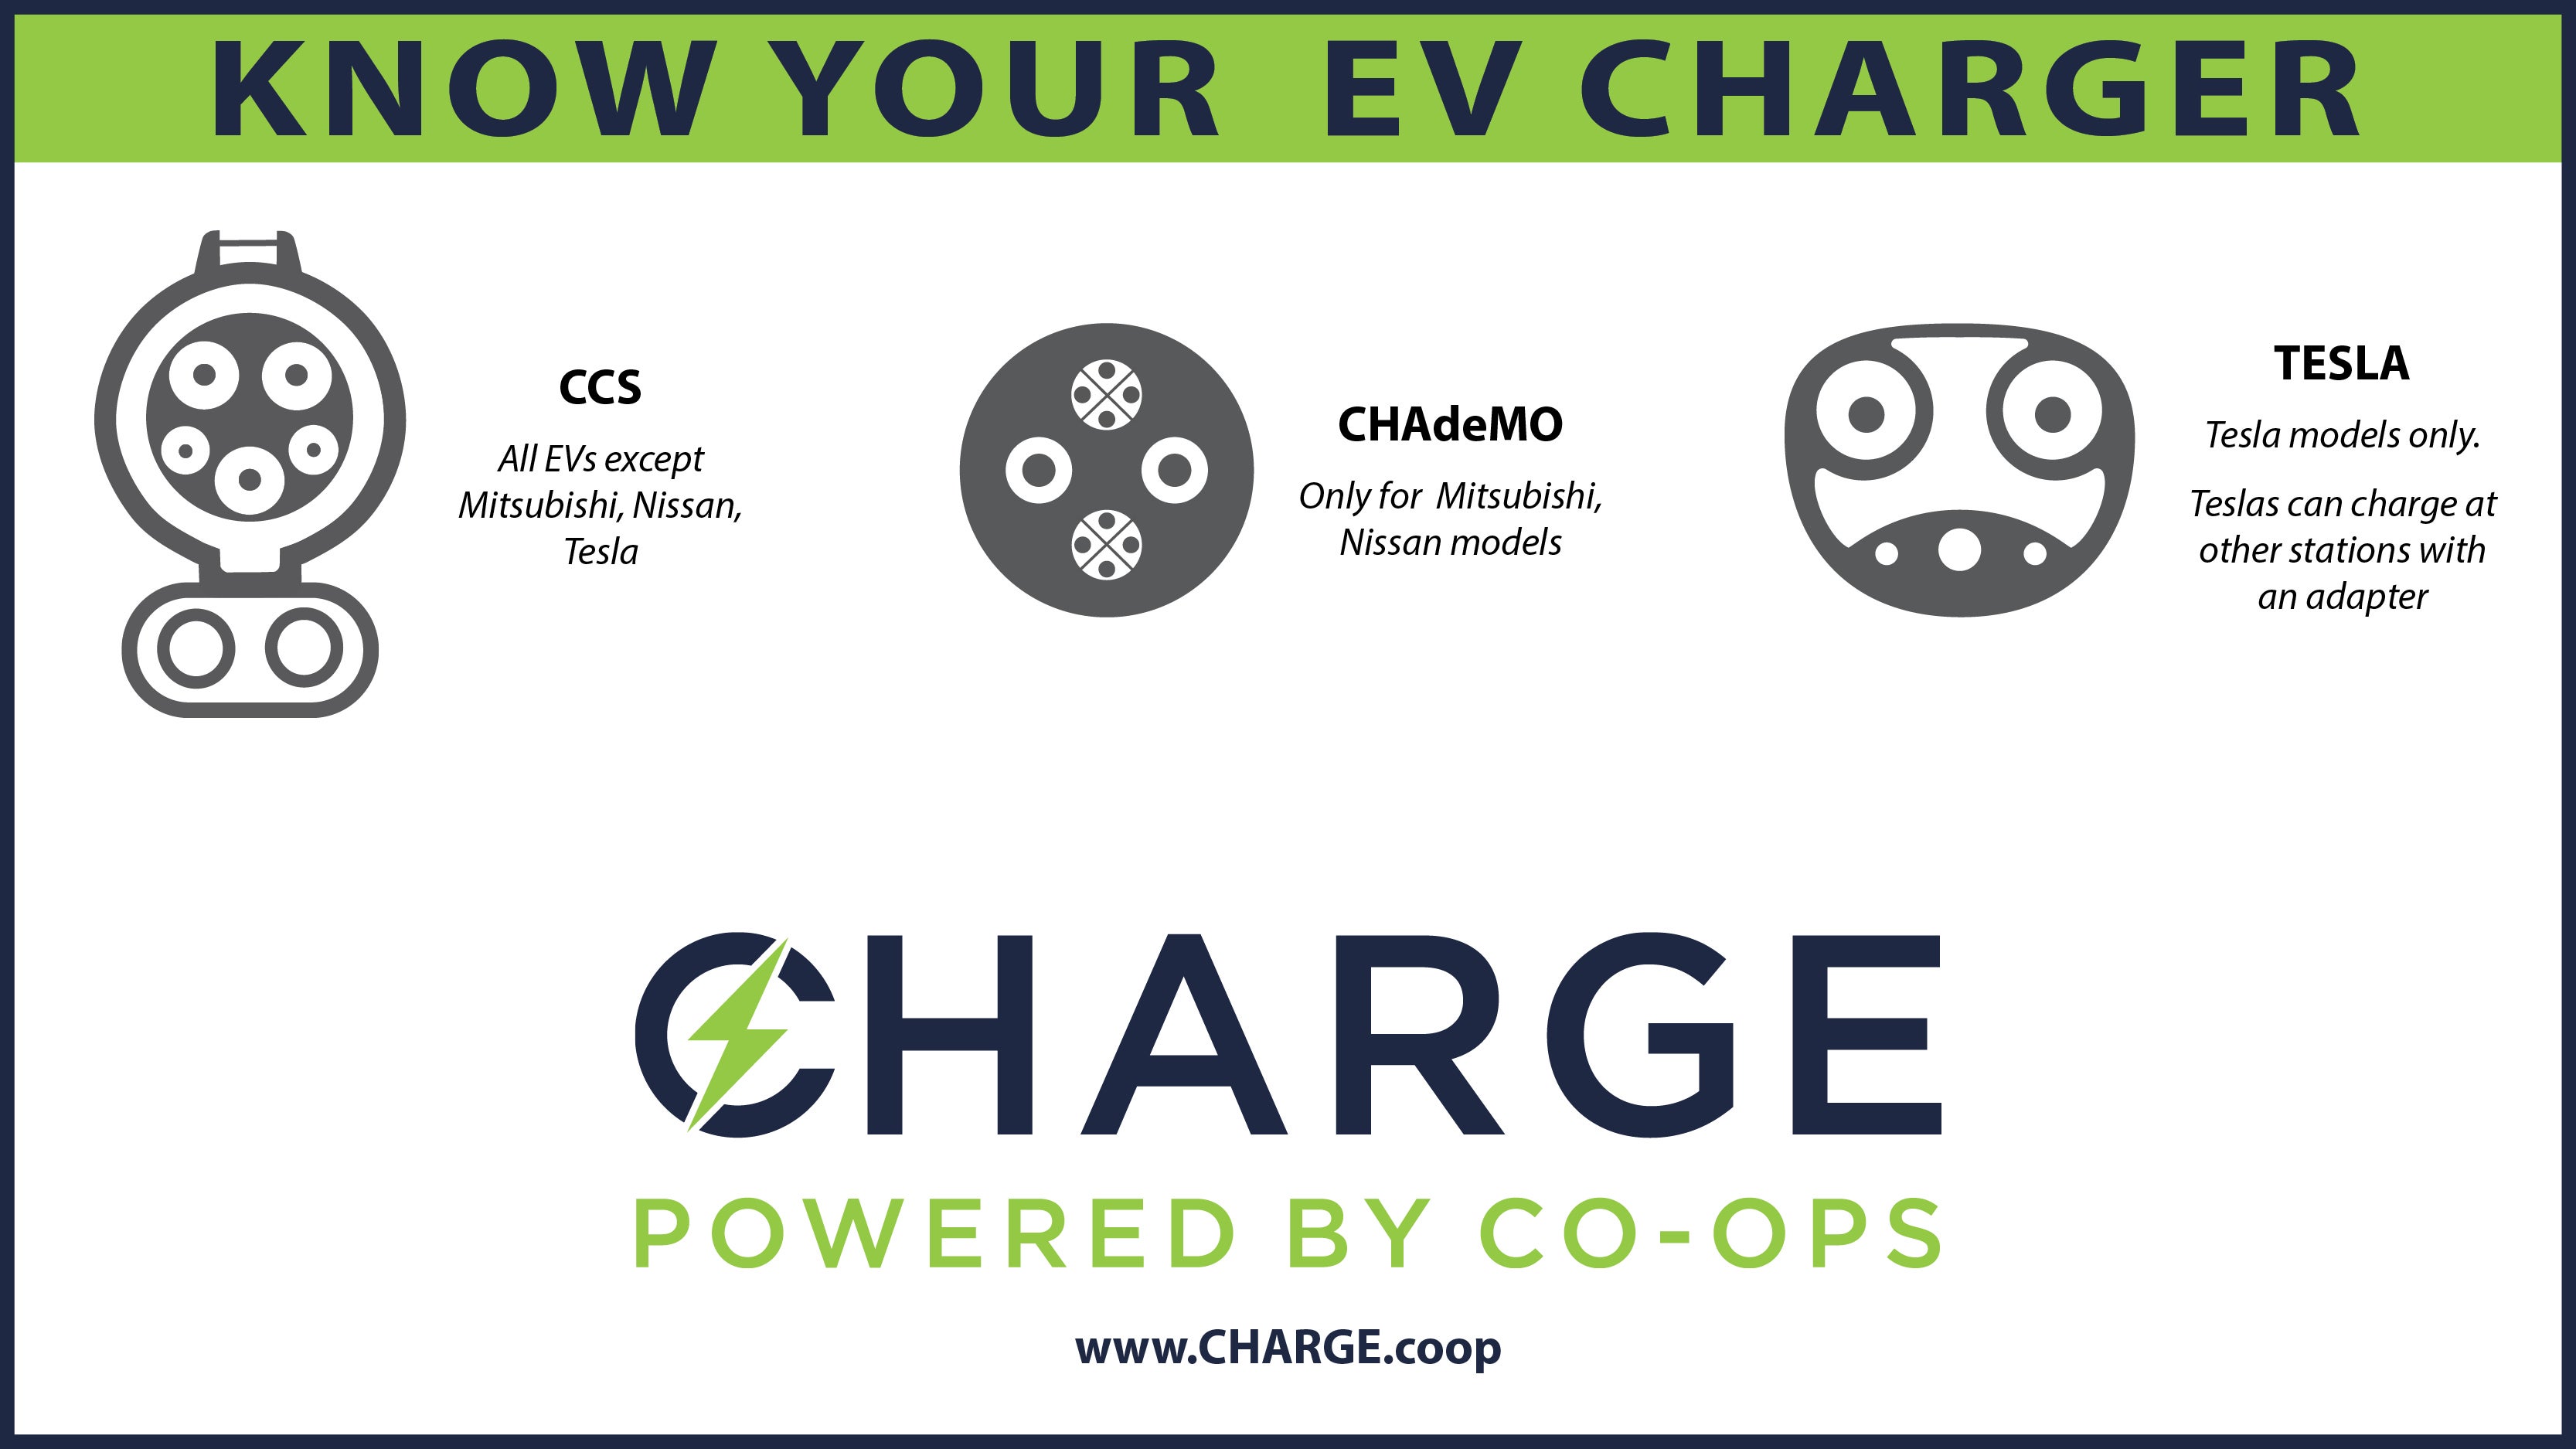 A description of the different EV chargers available. 